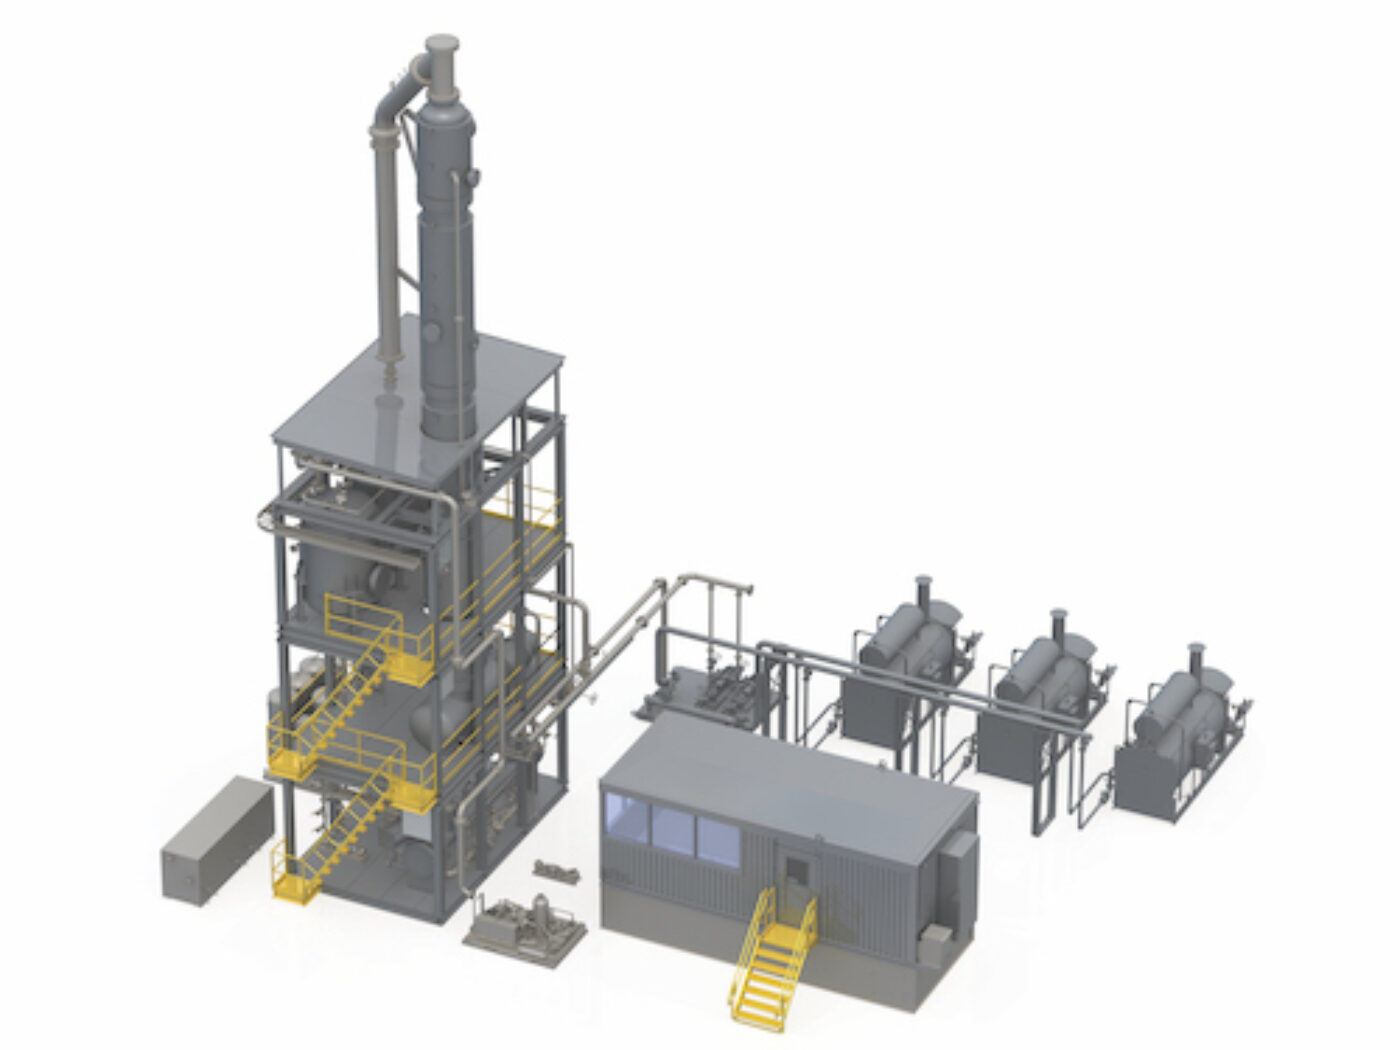 Modular Design of R3’s Vacuum Assisted Pure Oil Recovery technology